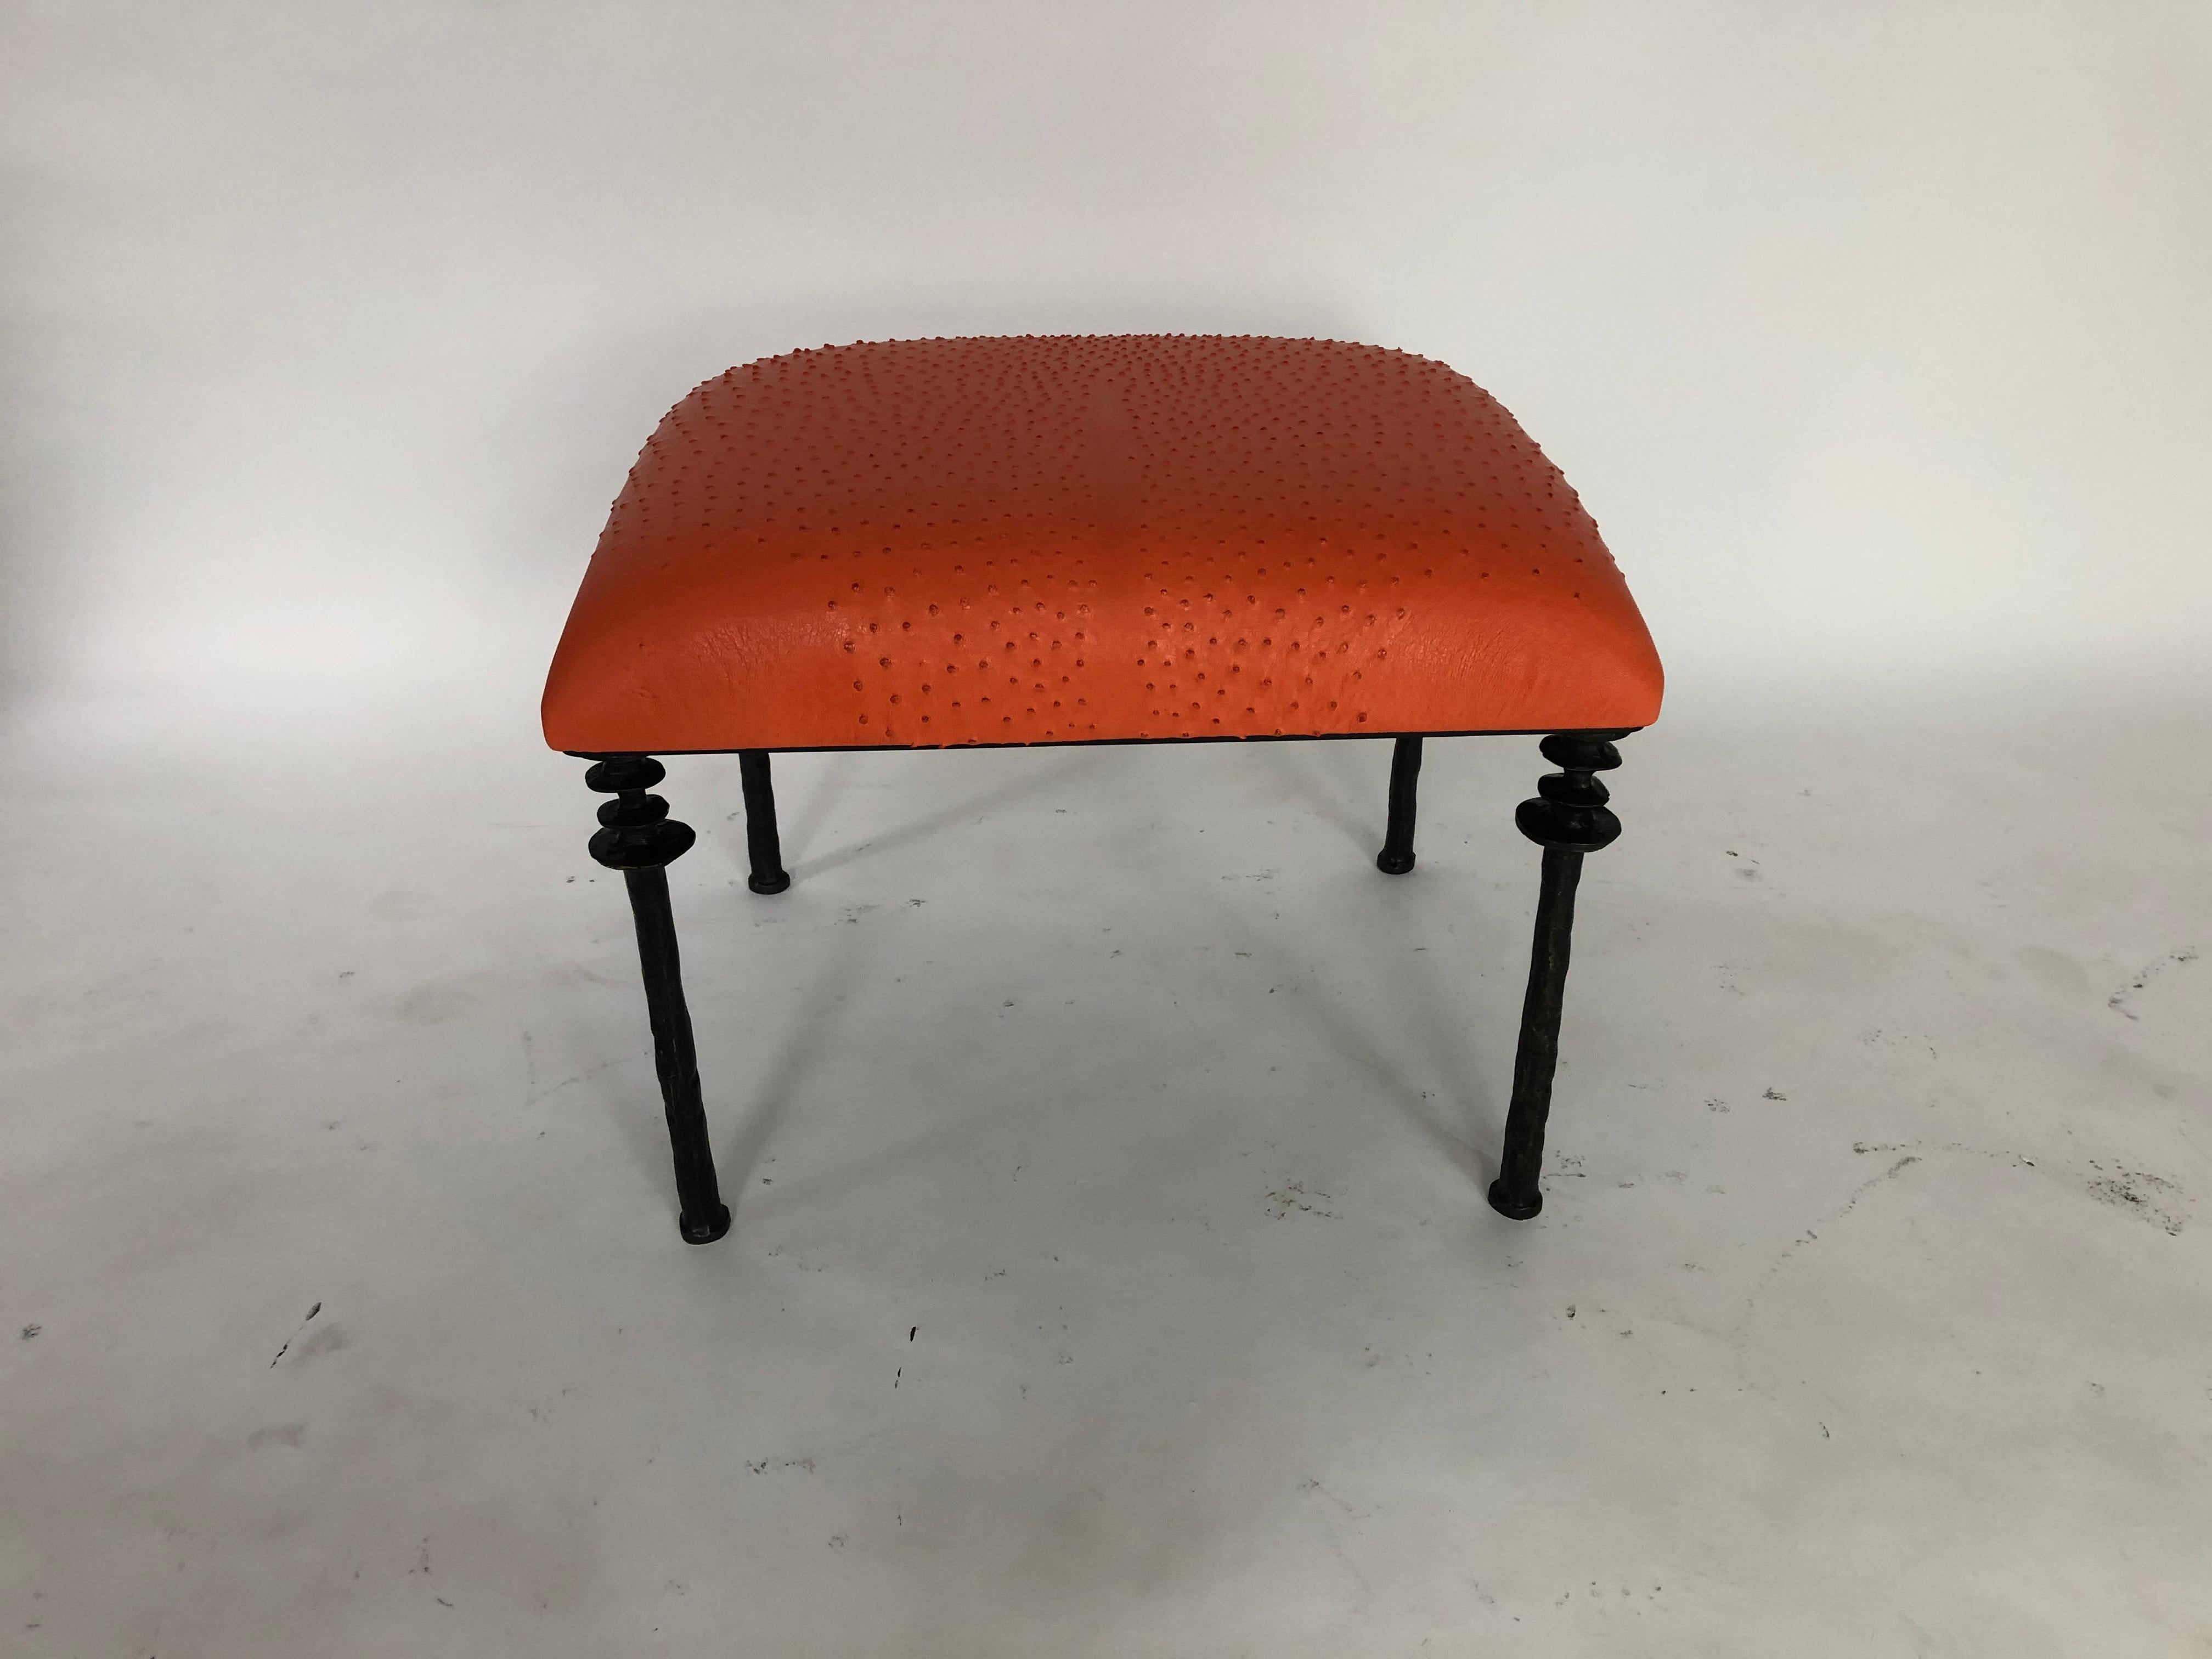 Contemporary Pair of Sorgue Stools, by Bourgeois Boheme Atelier, Tangerine Ostrich Leather